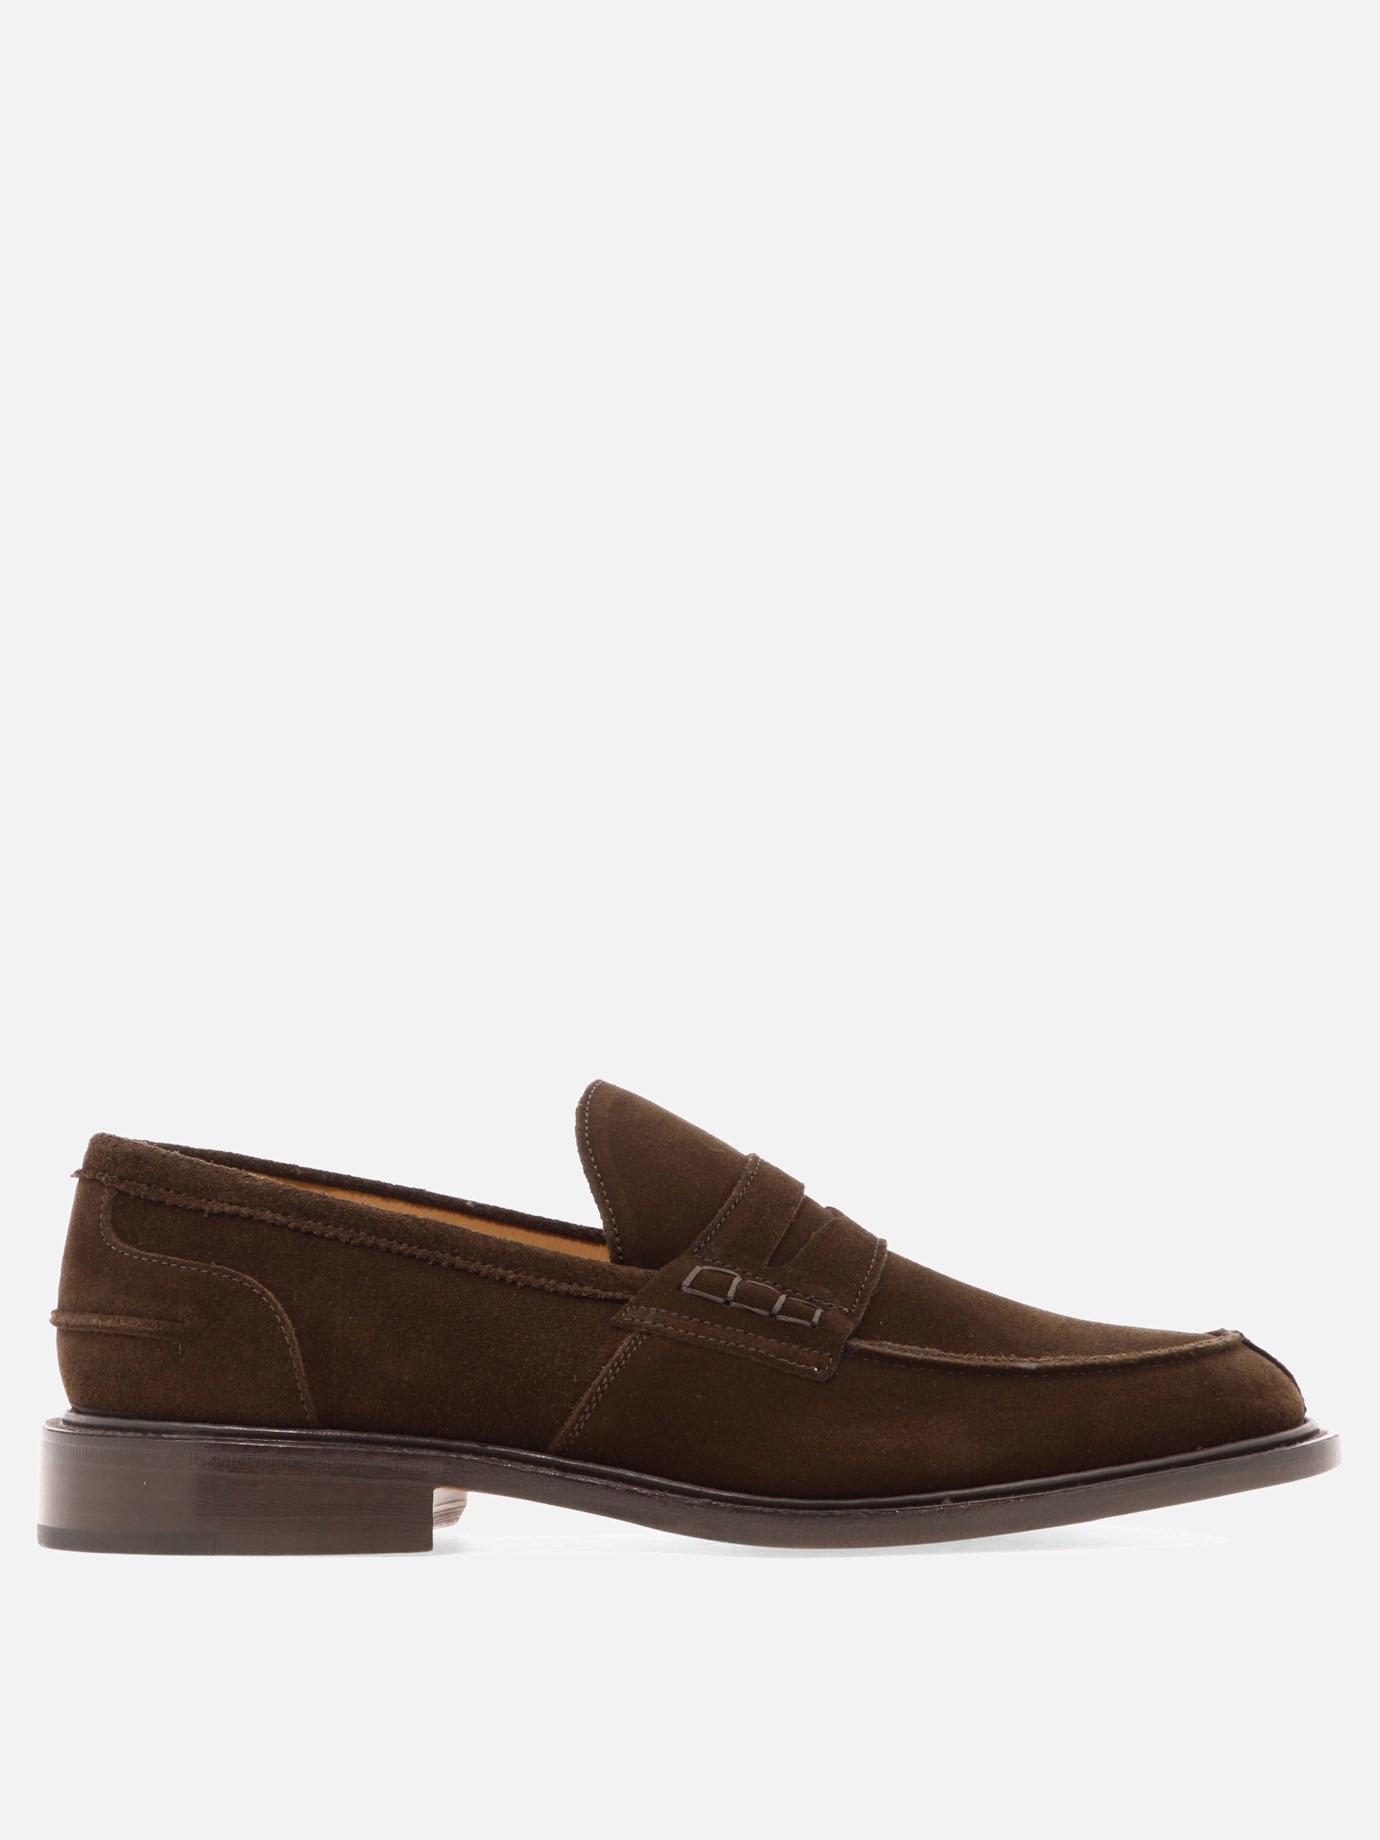  James  loafersby Tricker's - 2